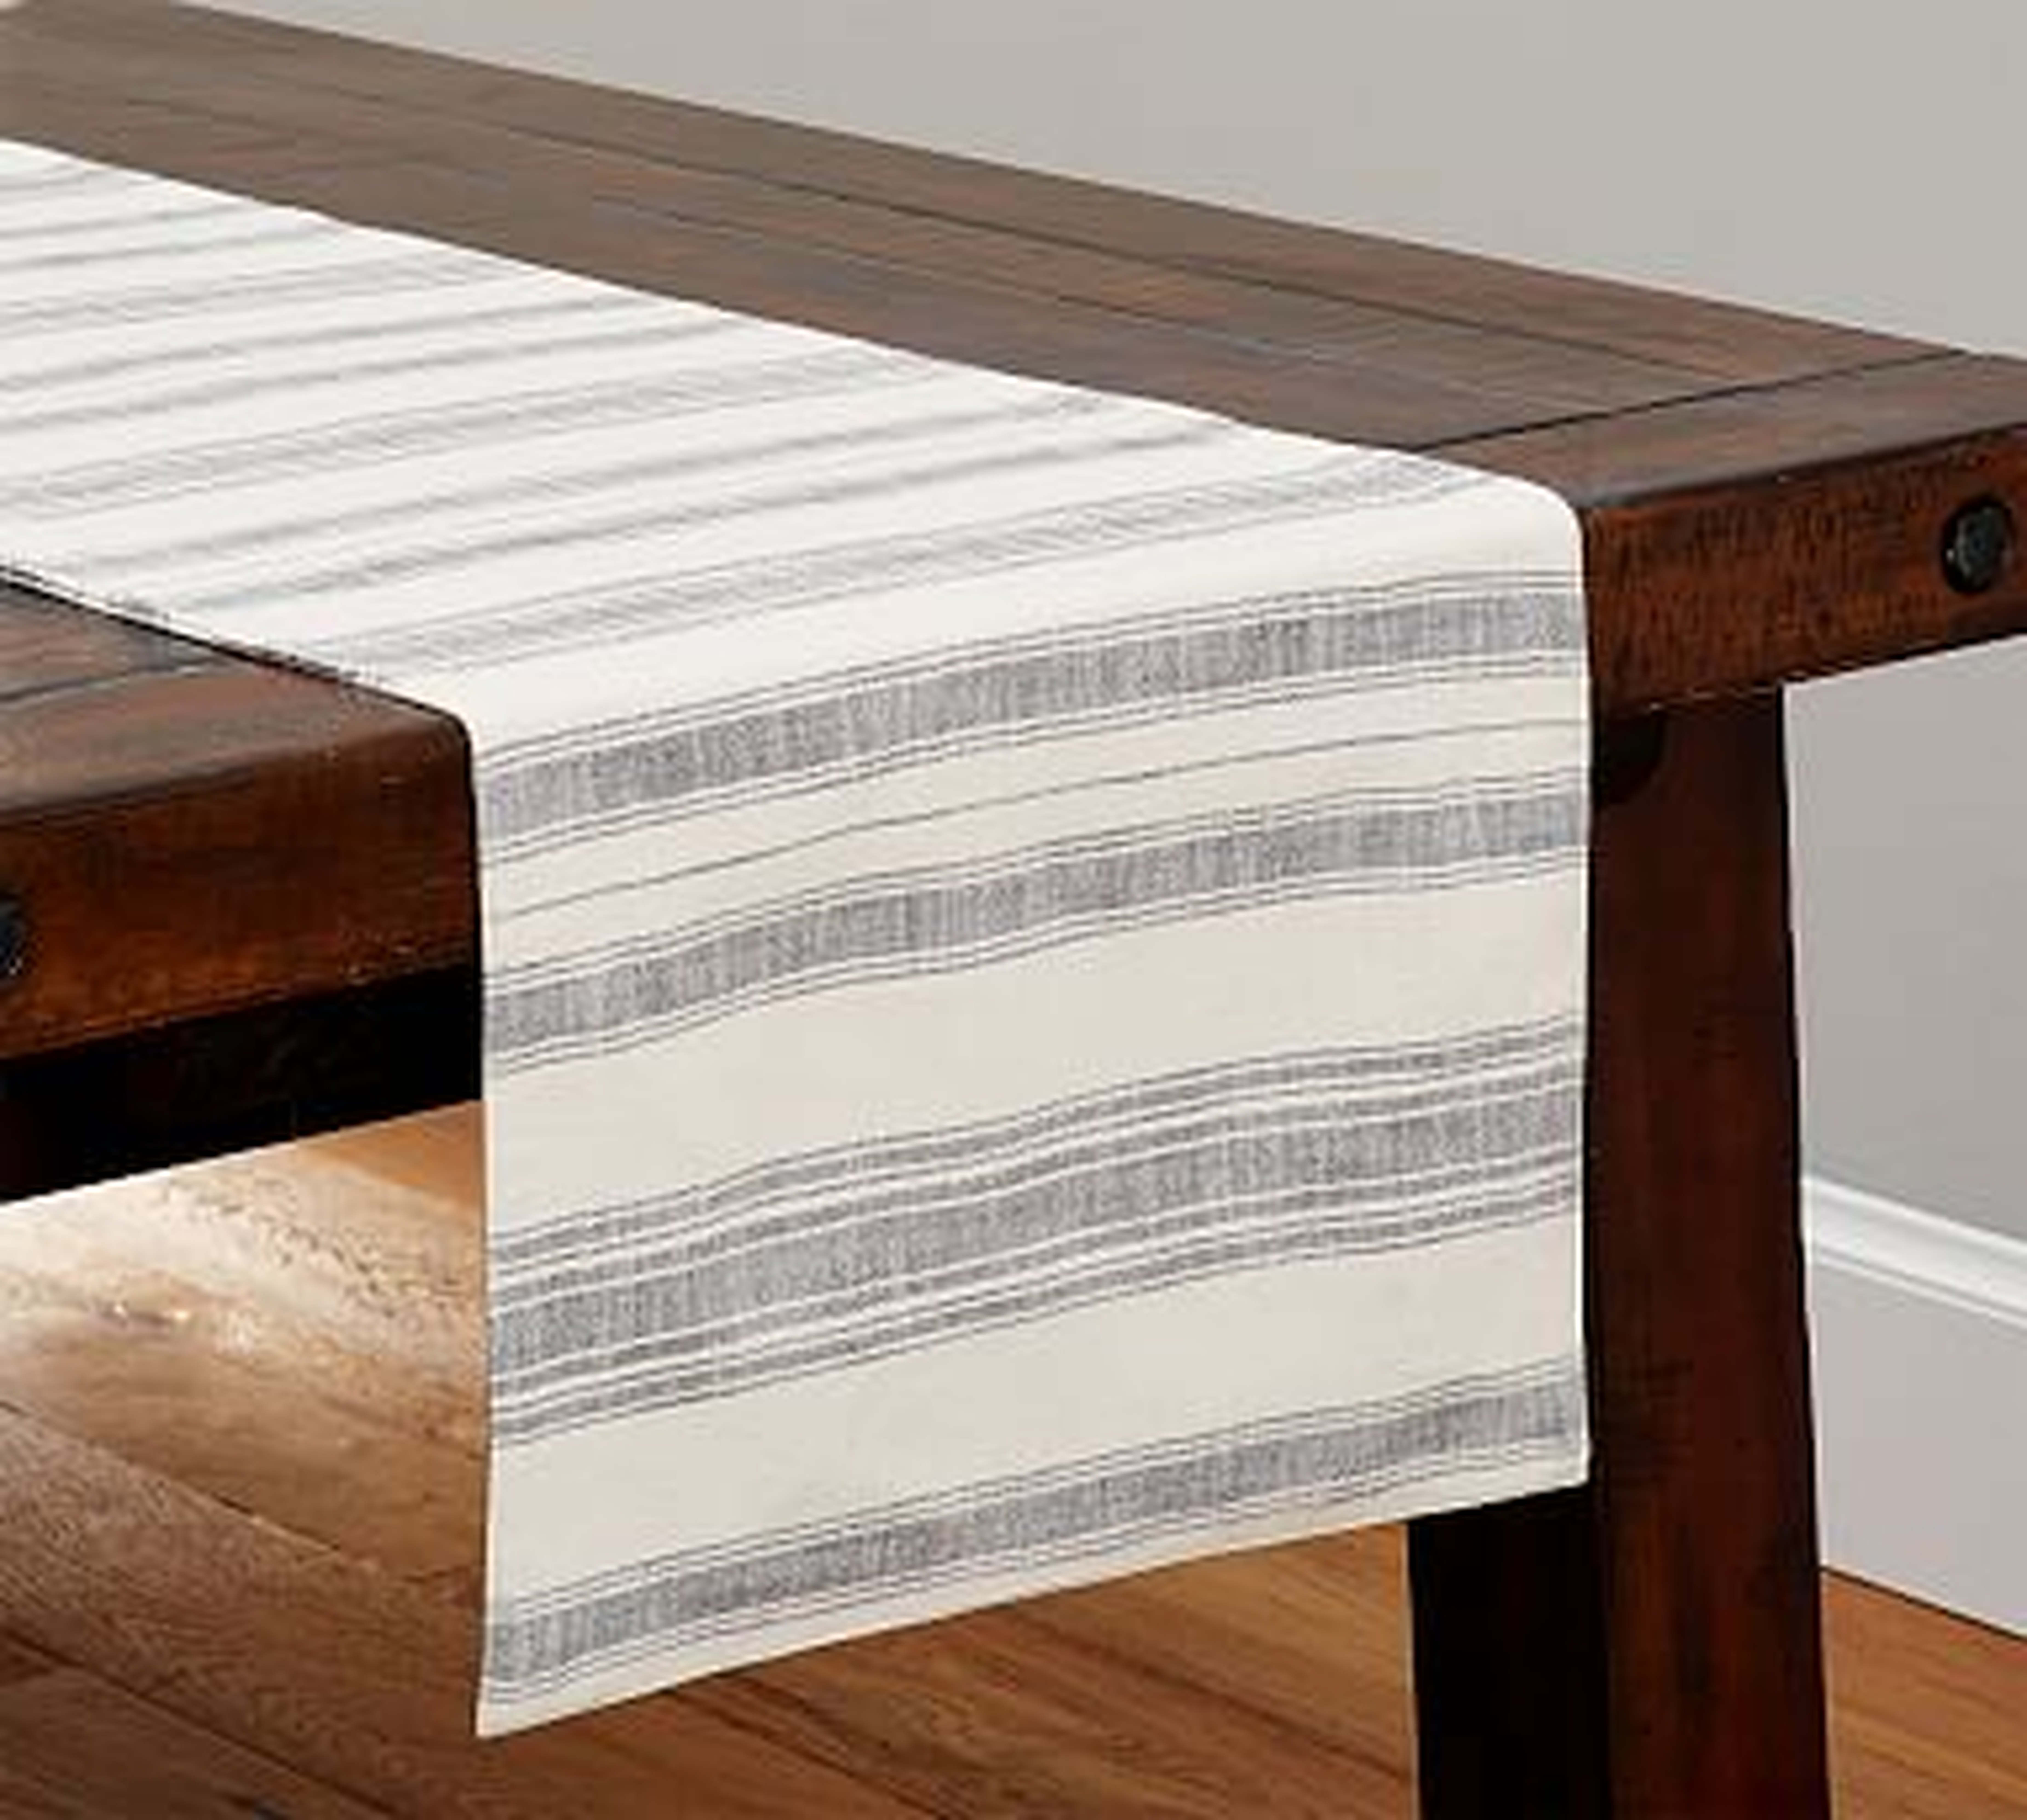 French Stripe Table Runner, 18" wide x 108" long - Pottery Barn